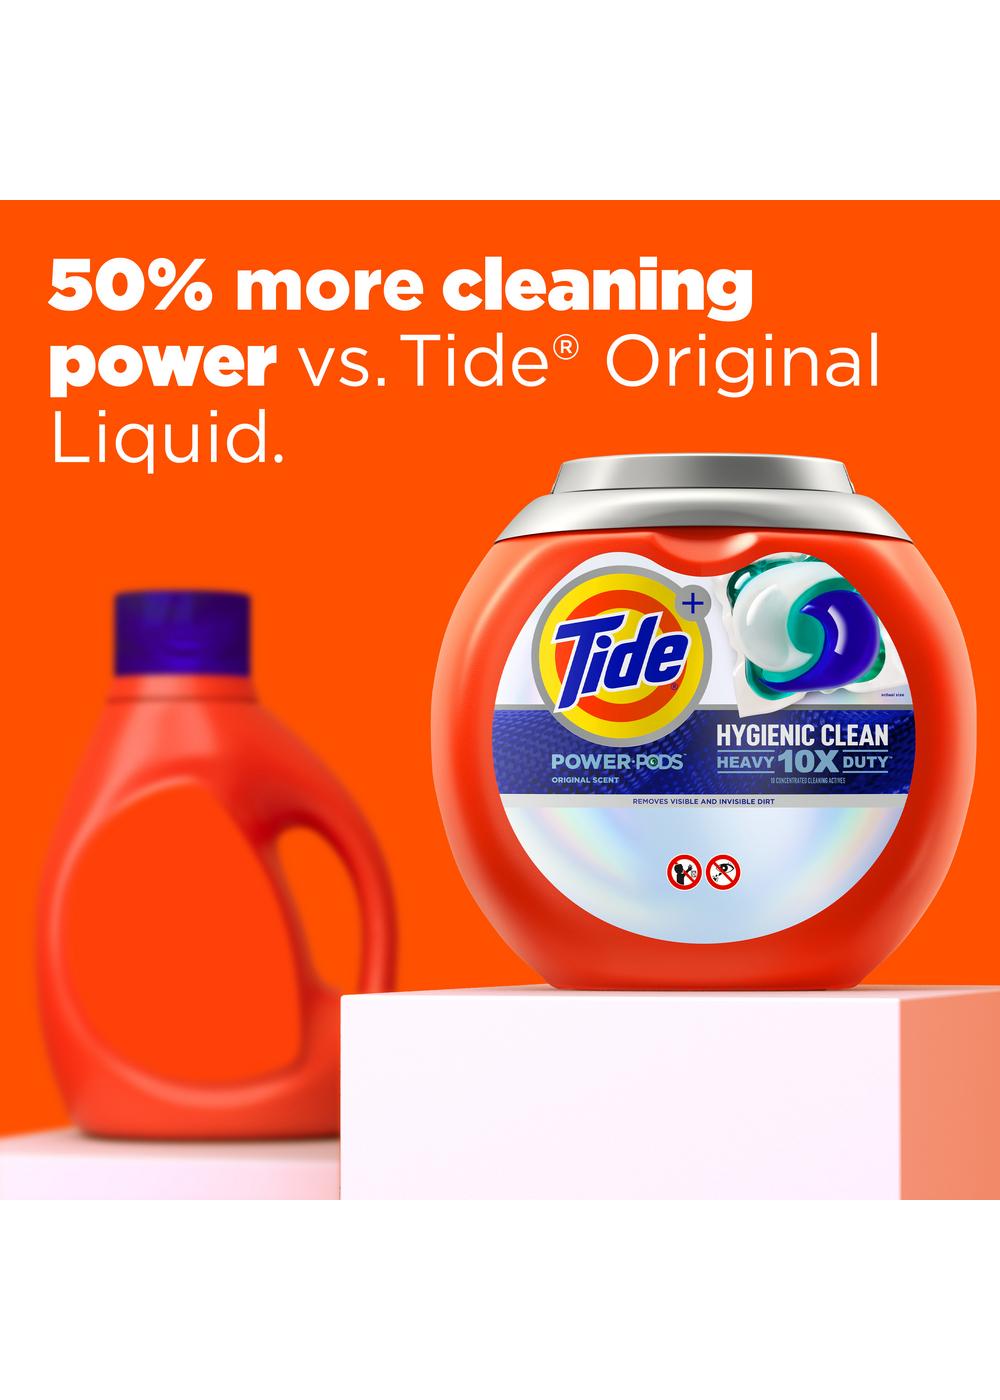 Tide Power PODS Hygienic Clean Heavy Duty Original HE Laundry Detergent; image 7 of 10